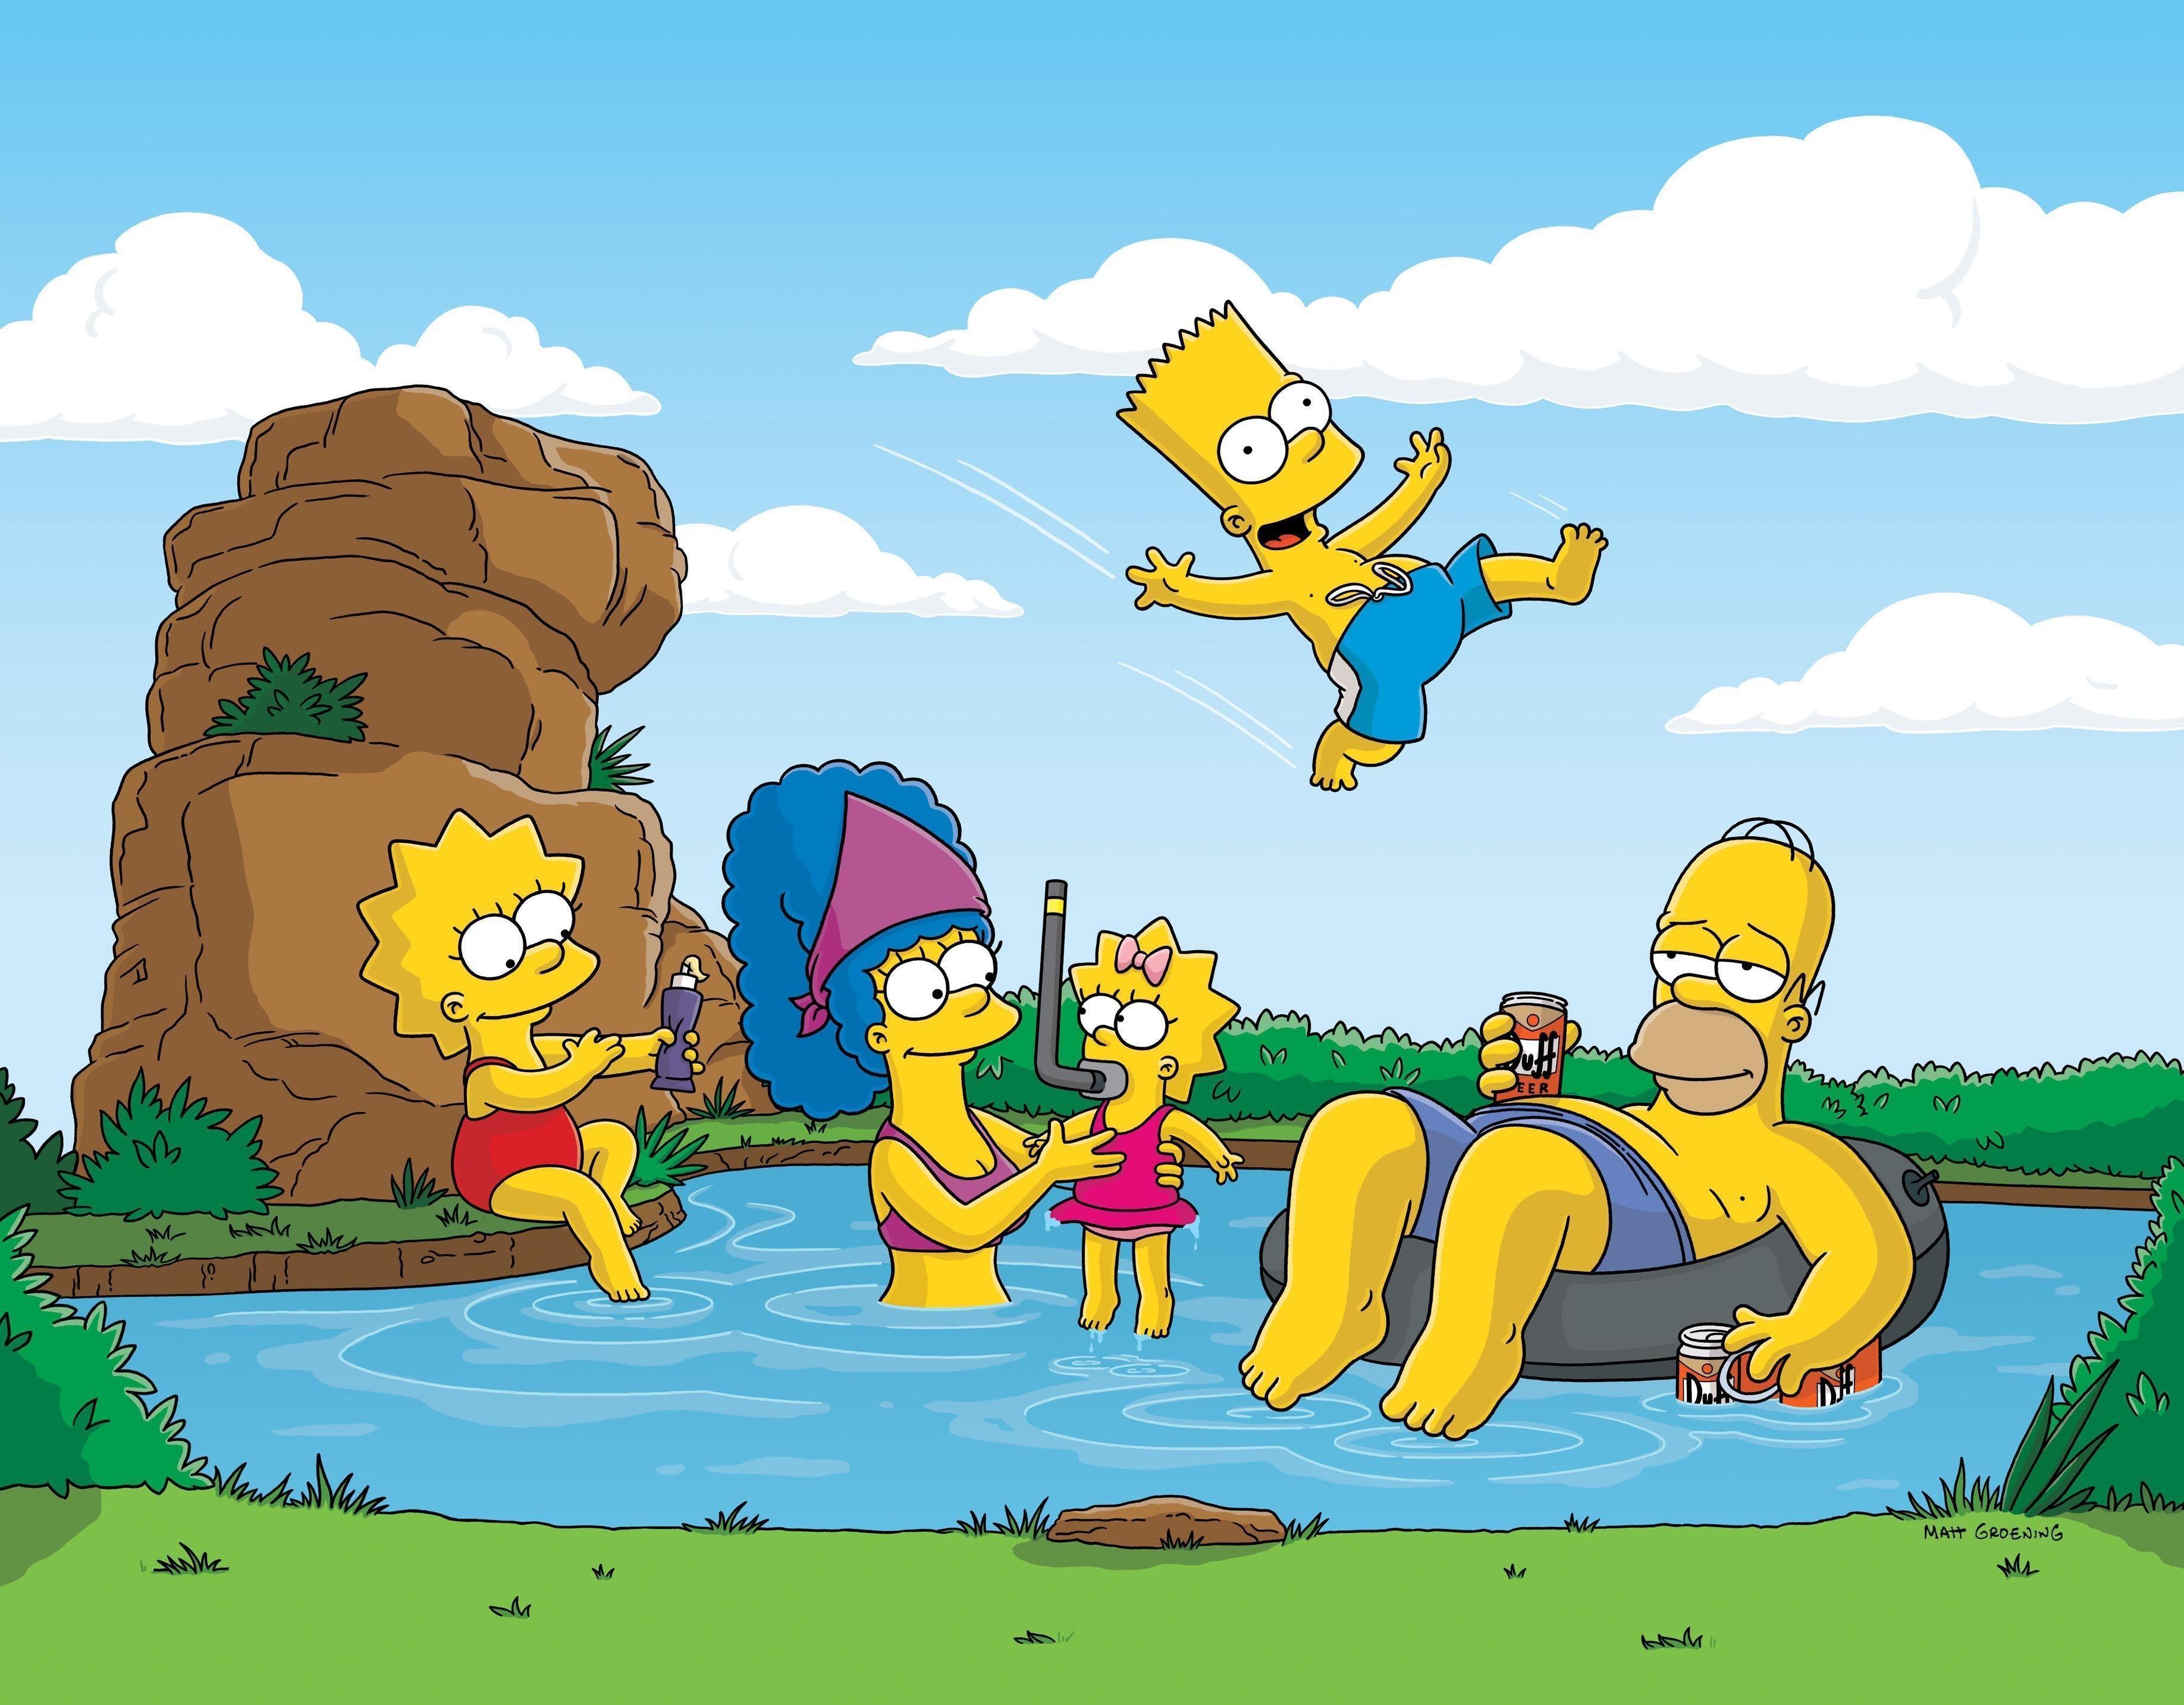 385 The Simpsons HD Wallpapers